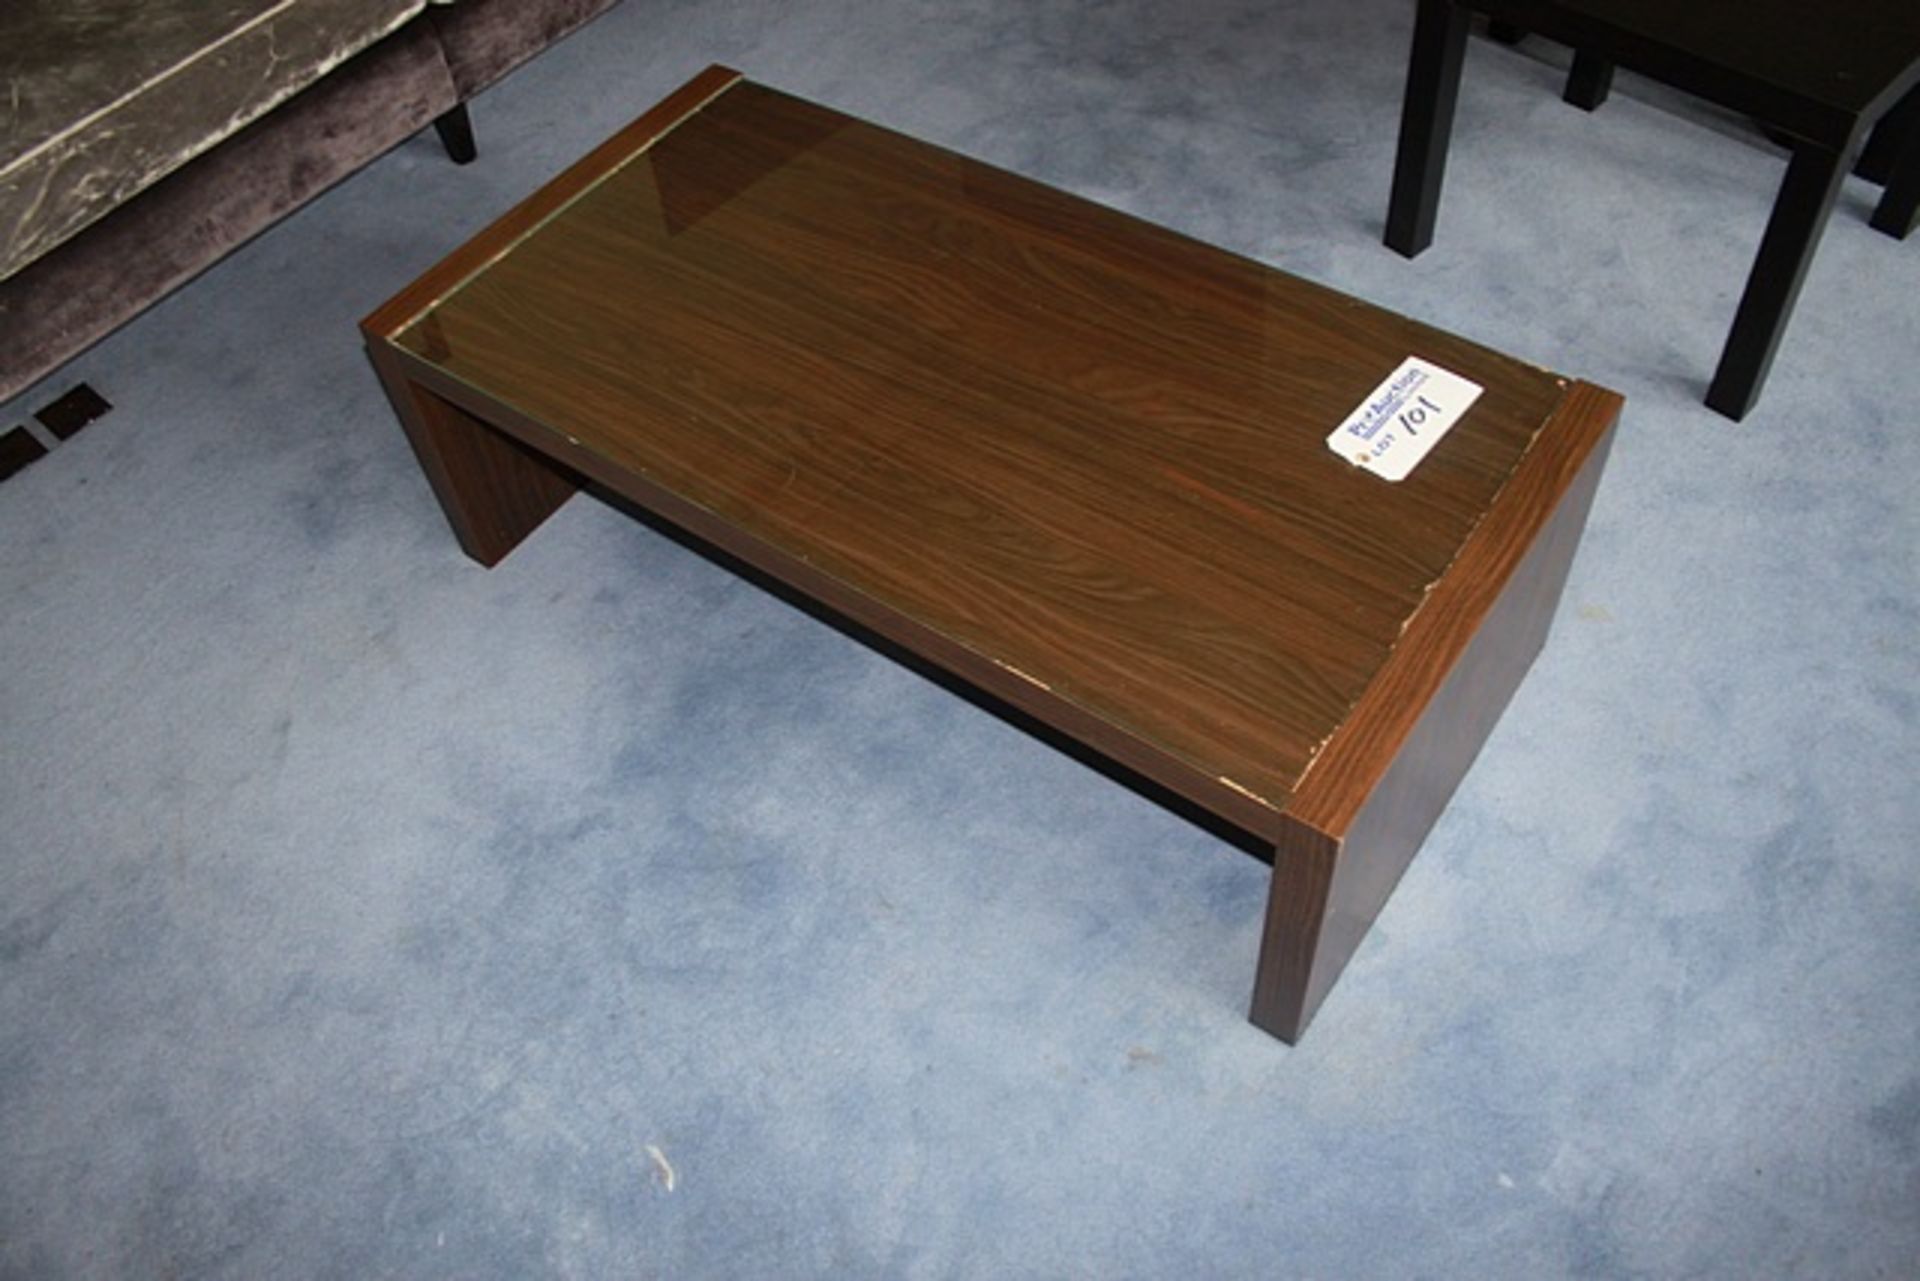 Coffee table in a walnut veneer style wood with glass top 1180mm x 590mm